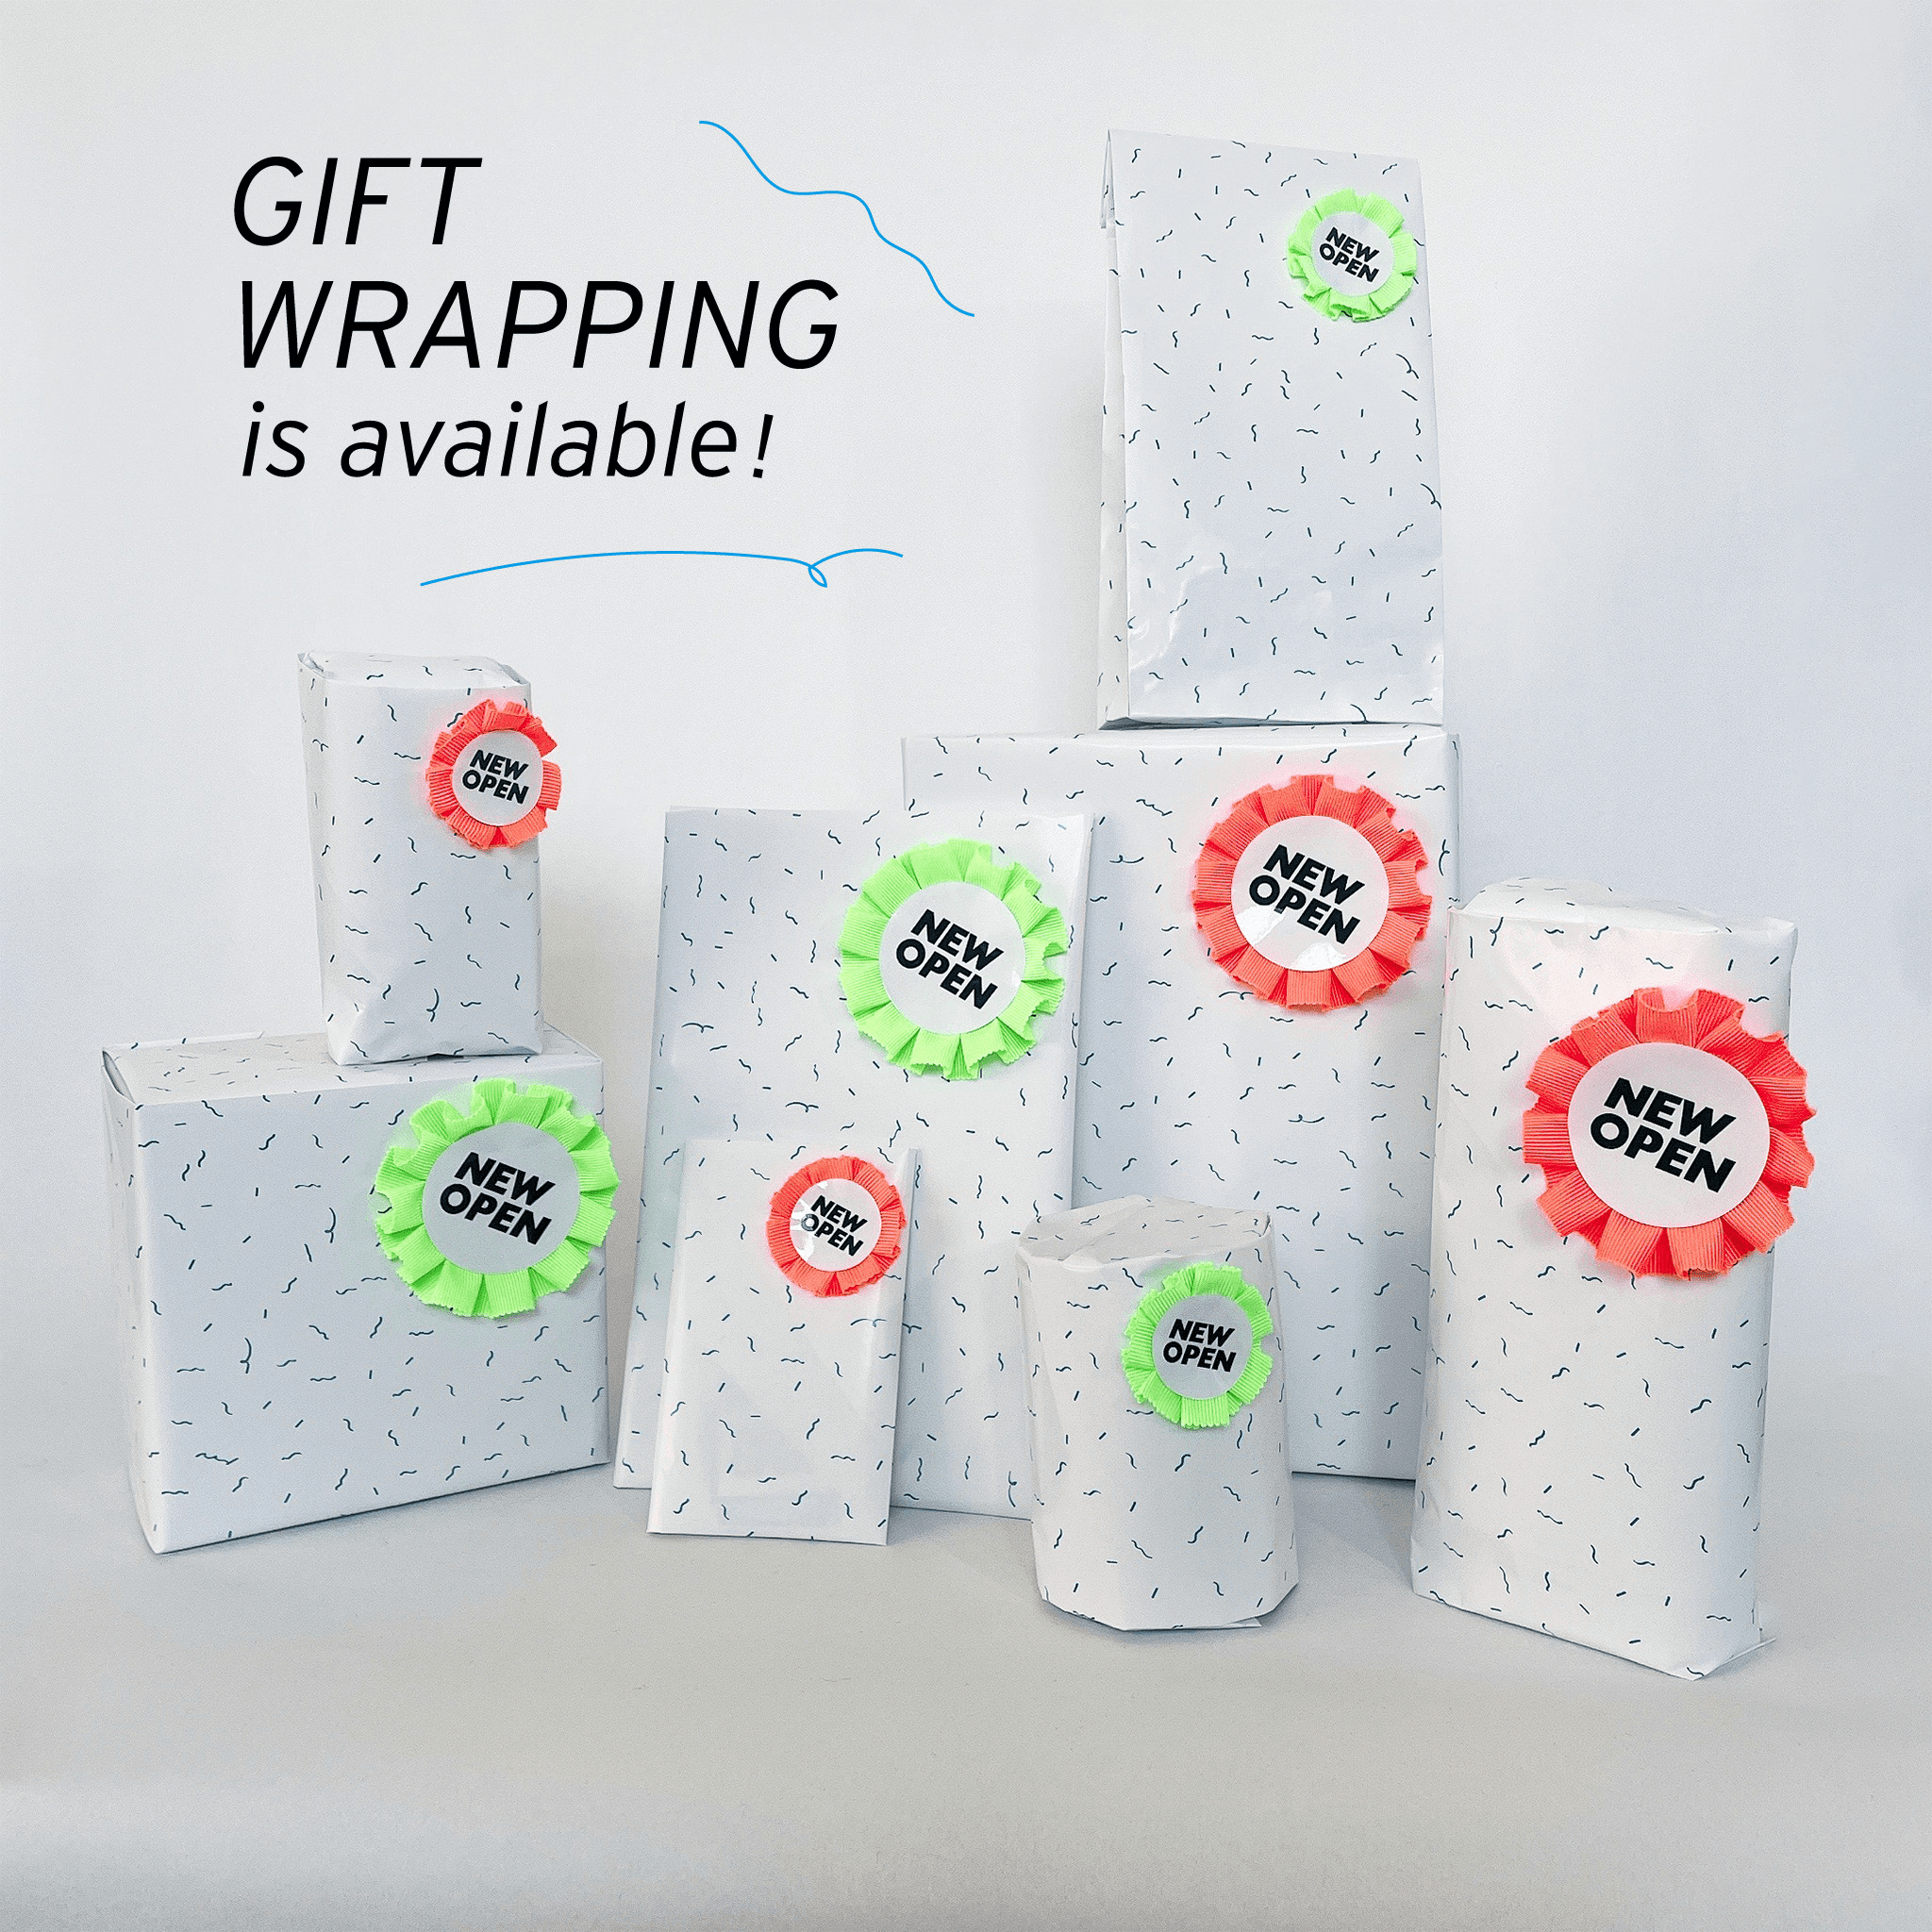 NEW OPEN gift wrapping